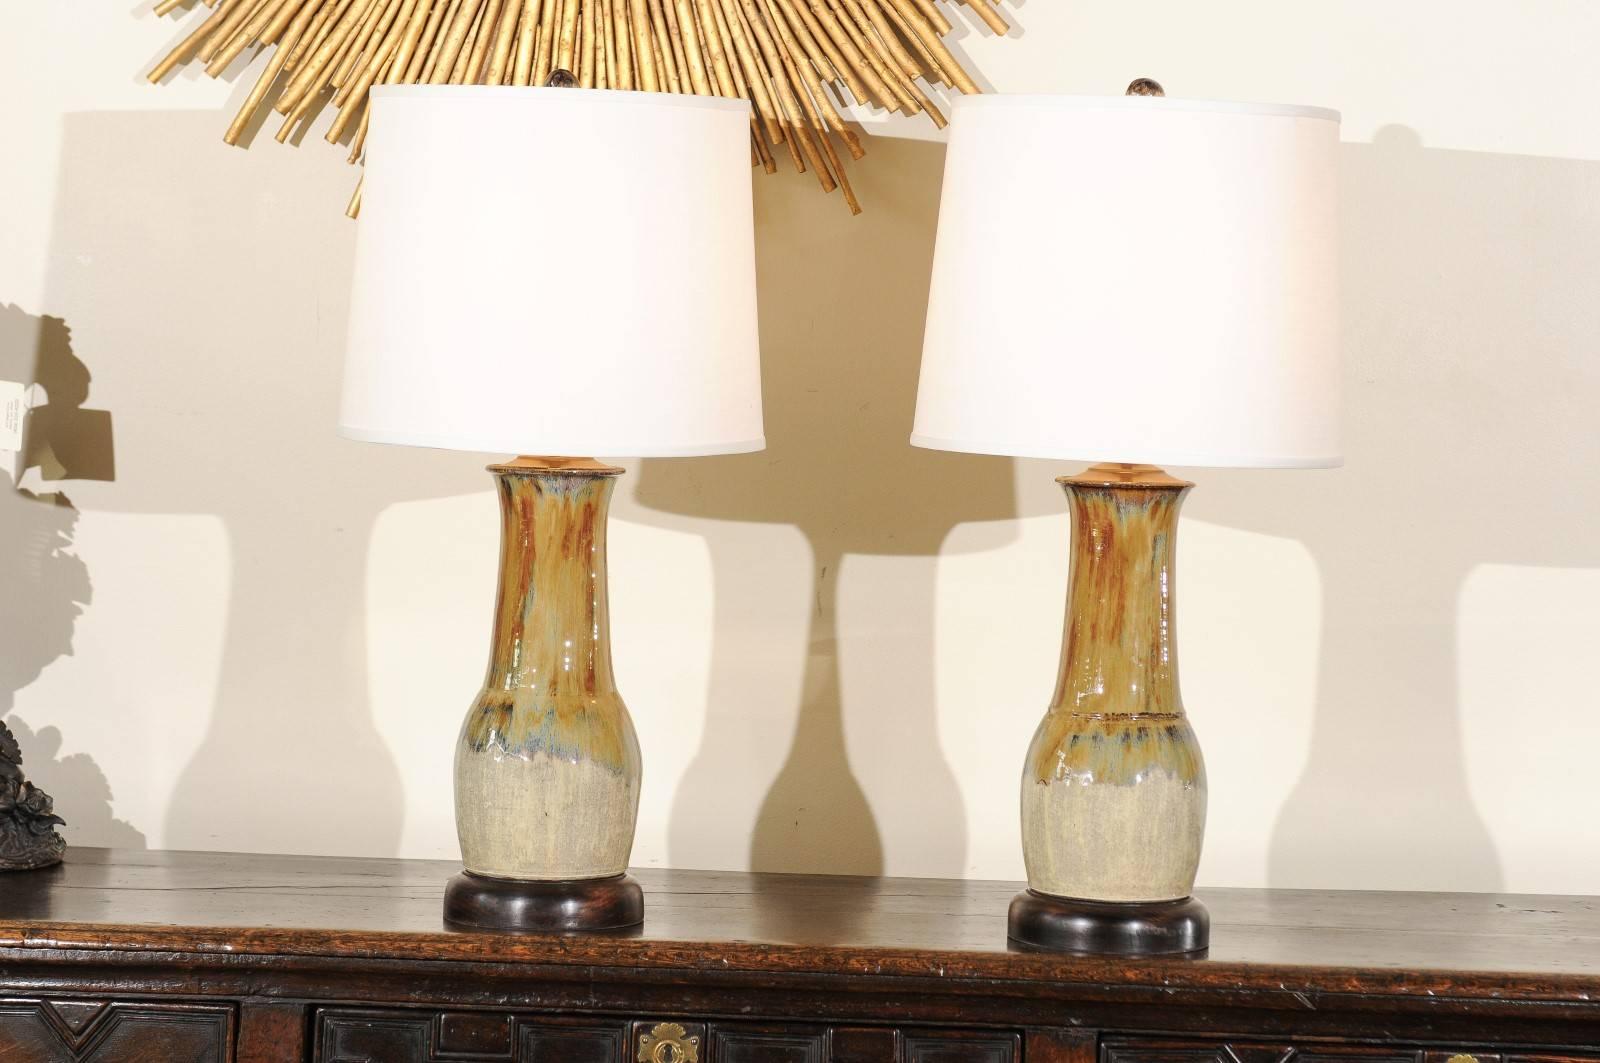 This unique pair of hand-thrown lamps created by Charlie West, a noted North Georgia potter since 1986. They are mounted on a wooden base which is hand-turned on a wood lathe. Each of his lamps is an original. We can order a single or a pair.